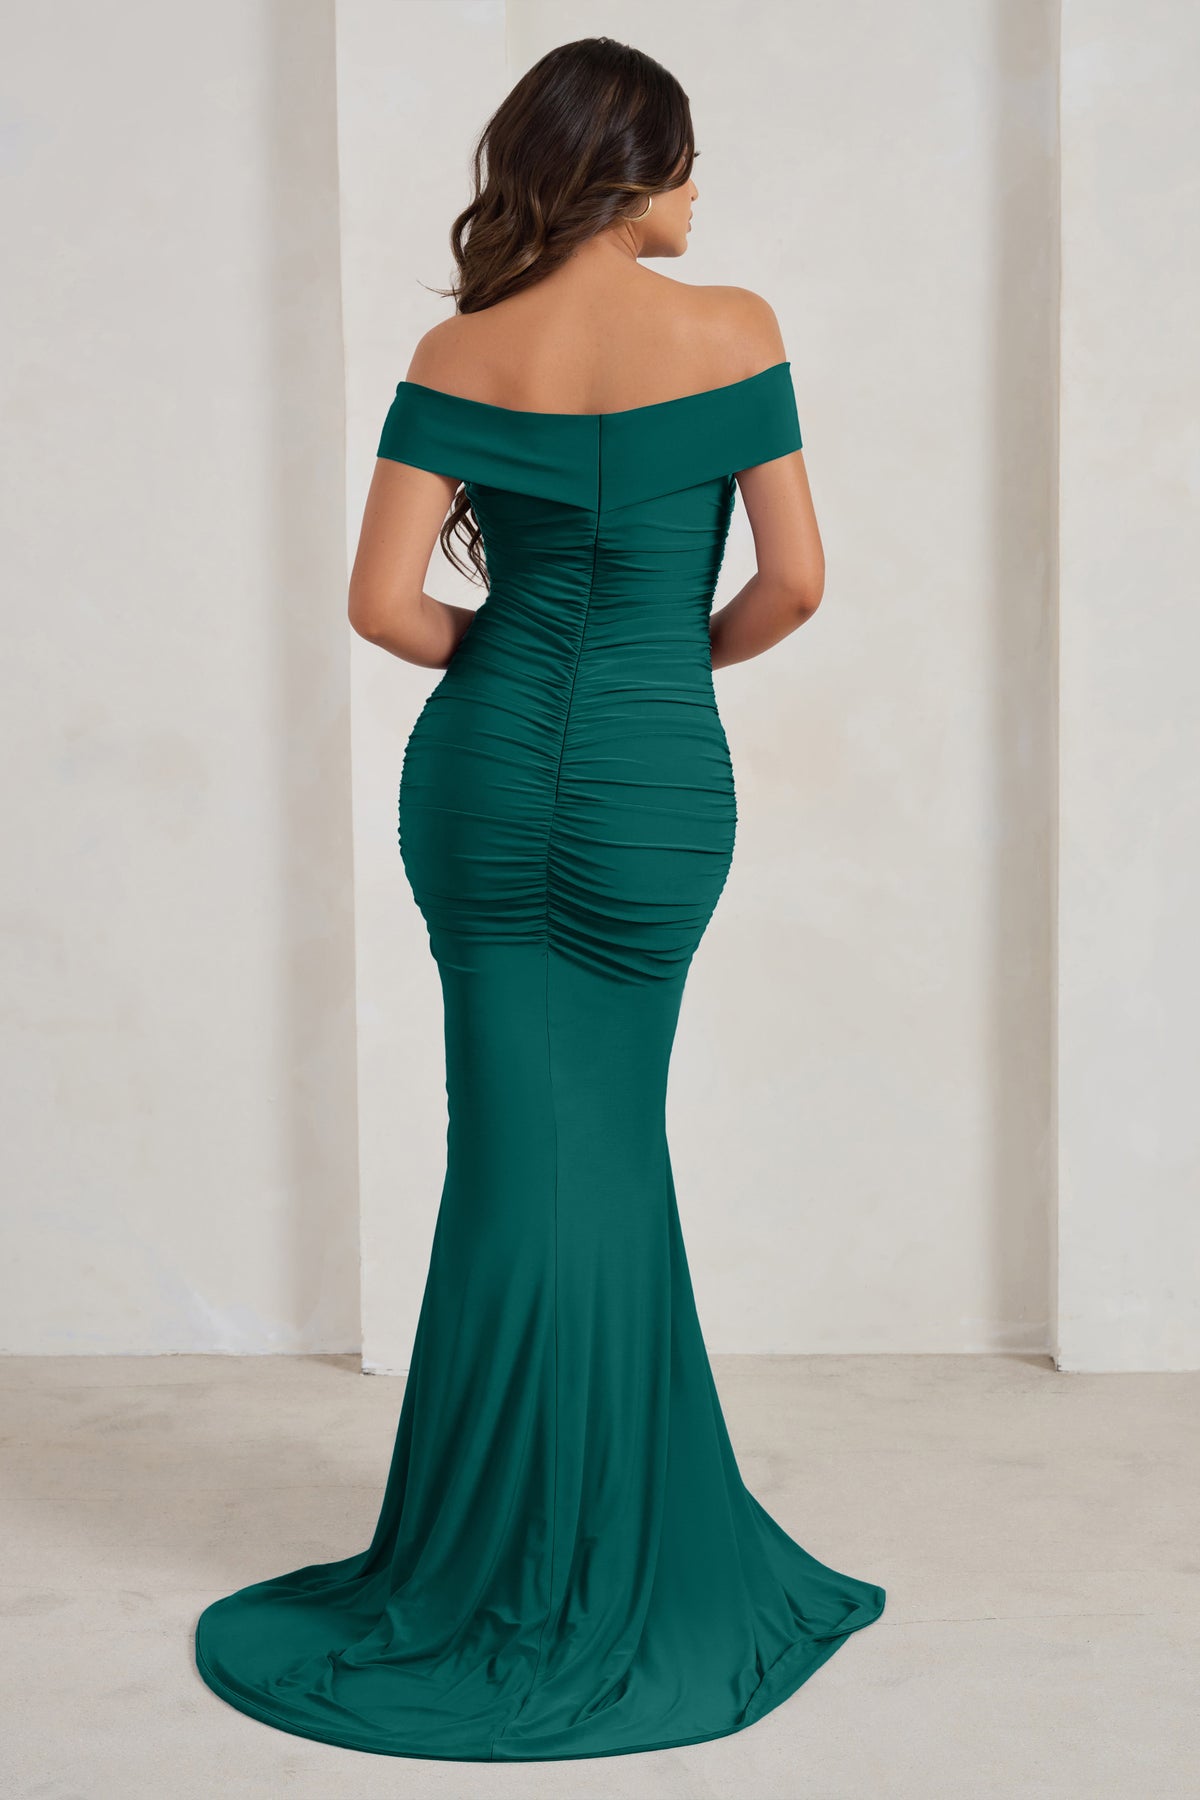 Apolline Bottle Green Off The Shoulder Ruched Fishtail Maxi Dress ...